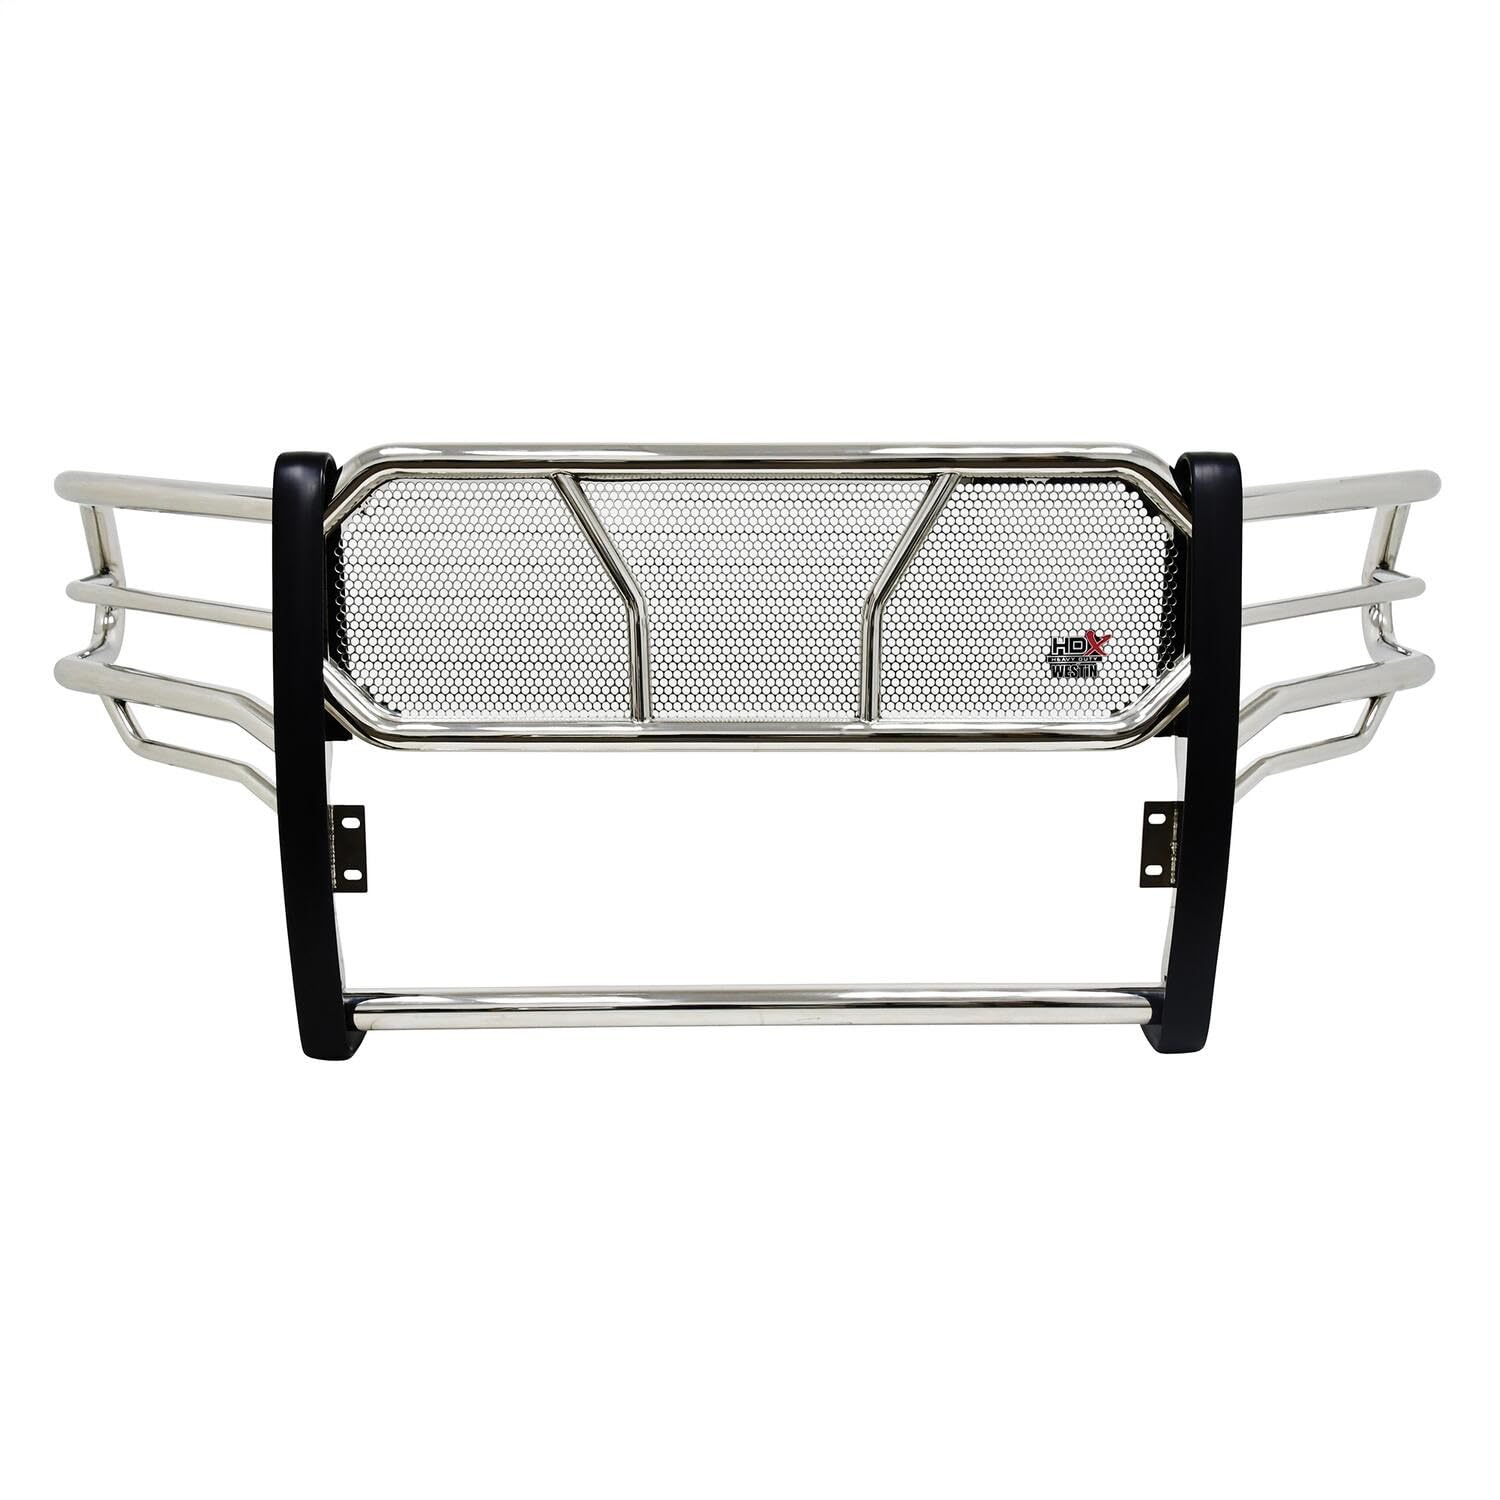 19C RAM 2500/3500(NEW BODY STYLE)HDX GRILLE GUARD STAINLESS STEEL DOES NOT WORK WITH TOW HOOKS